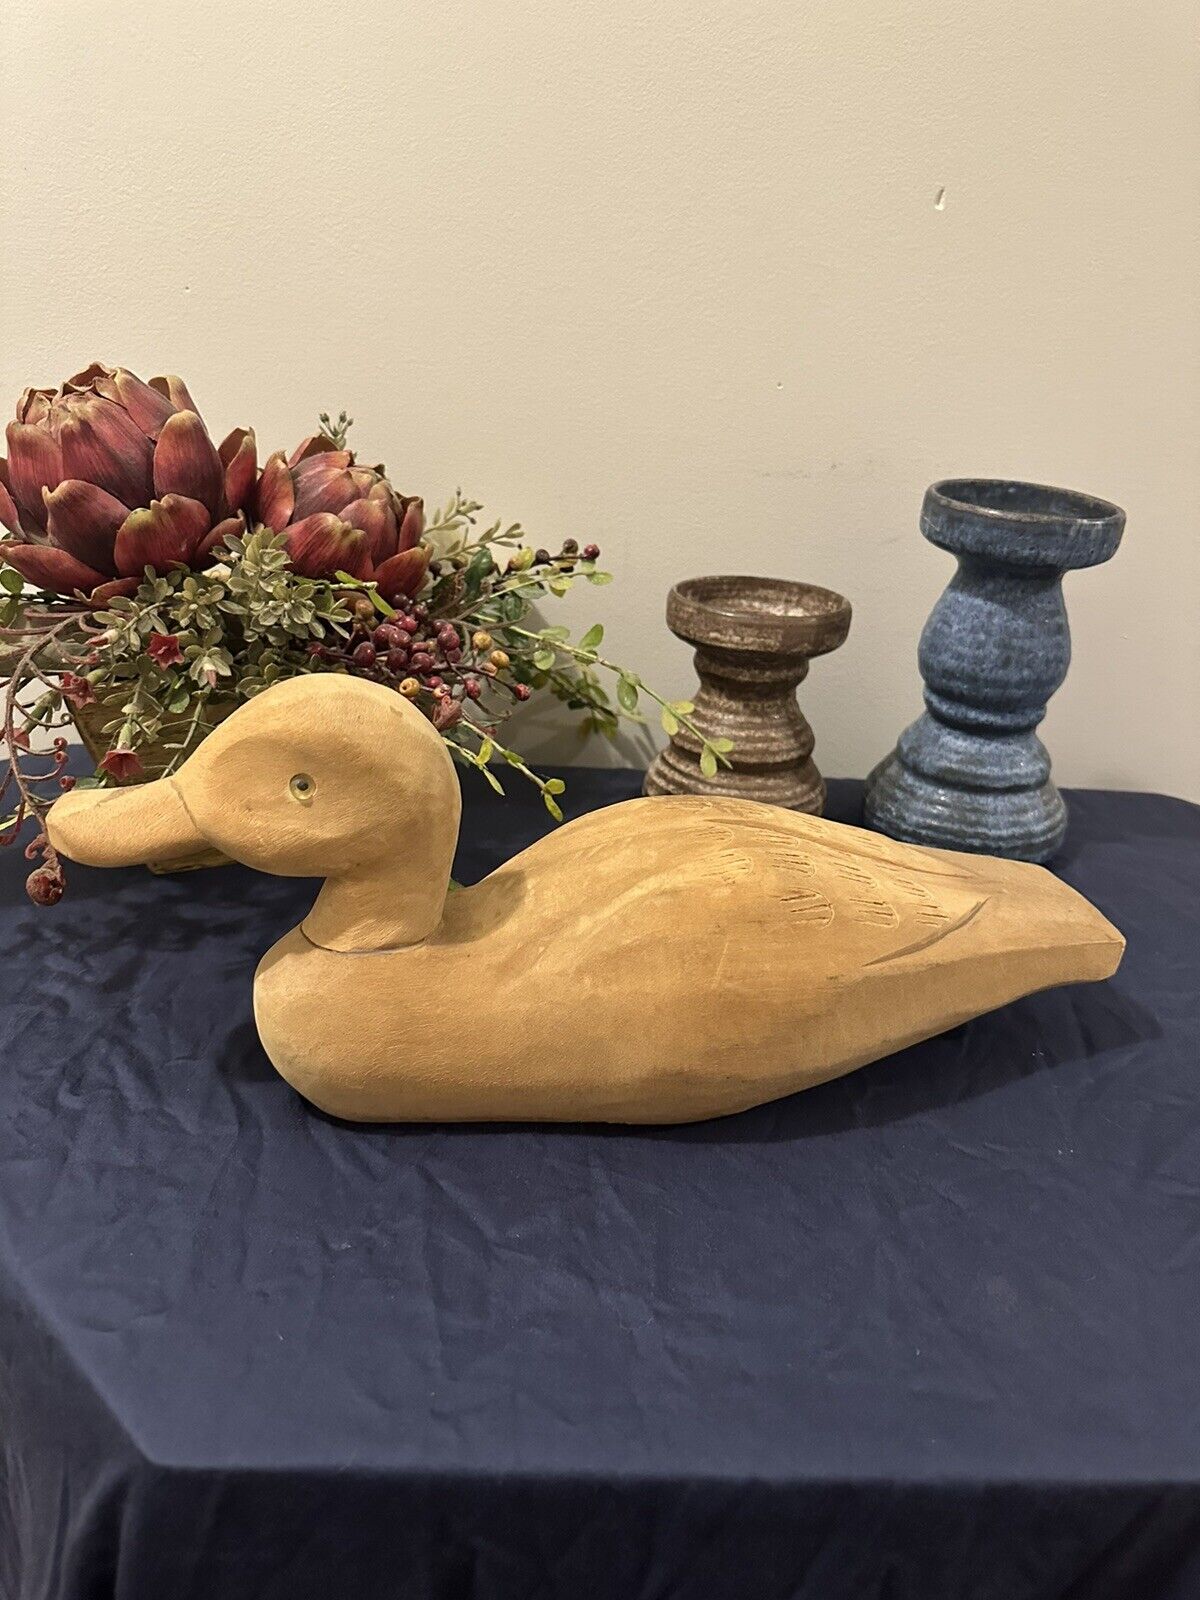 Vintage Hand Carved Duck Decoy Natural Wood w Glass Eyes